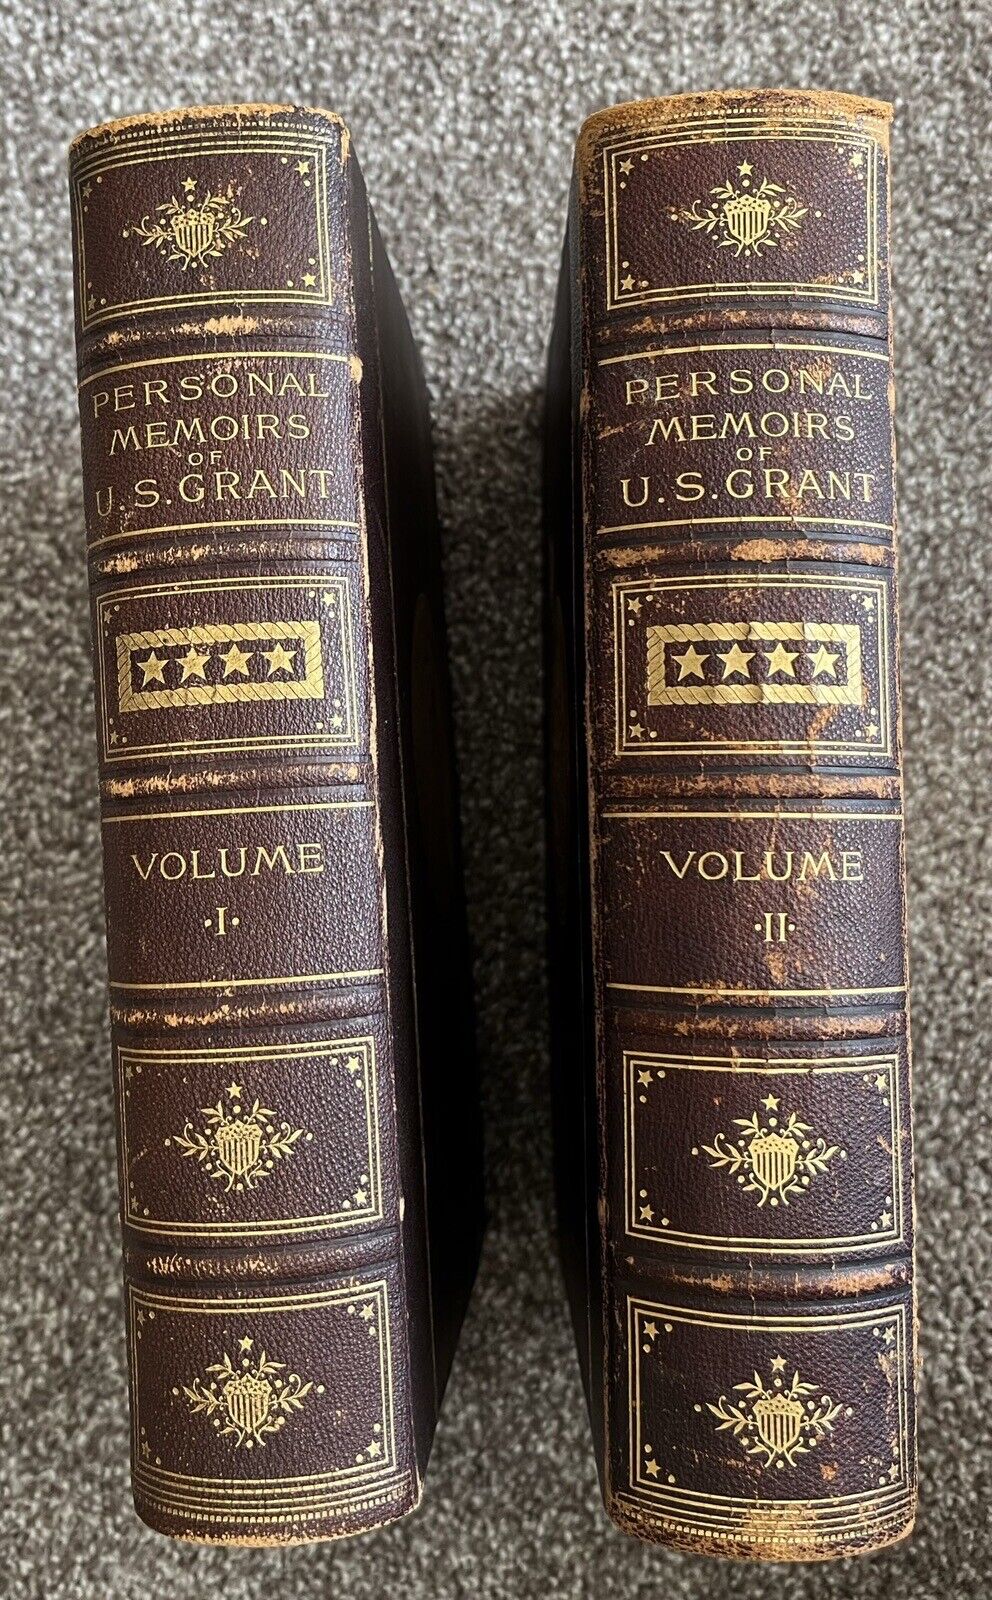 FIRST EDITION, PERSONAL MEMOIRS OF U. S. GRANT